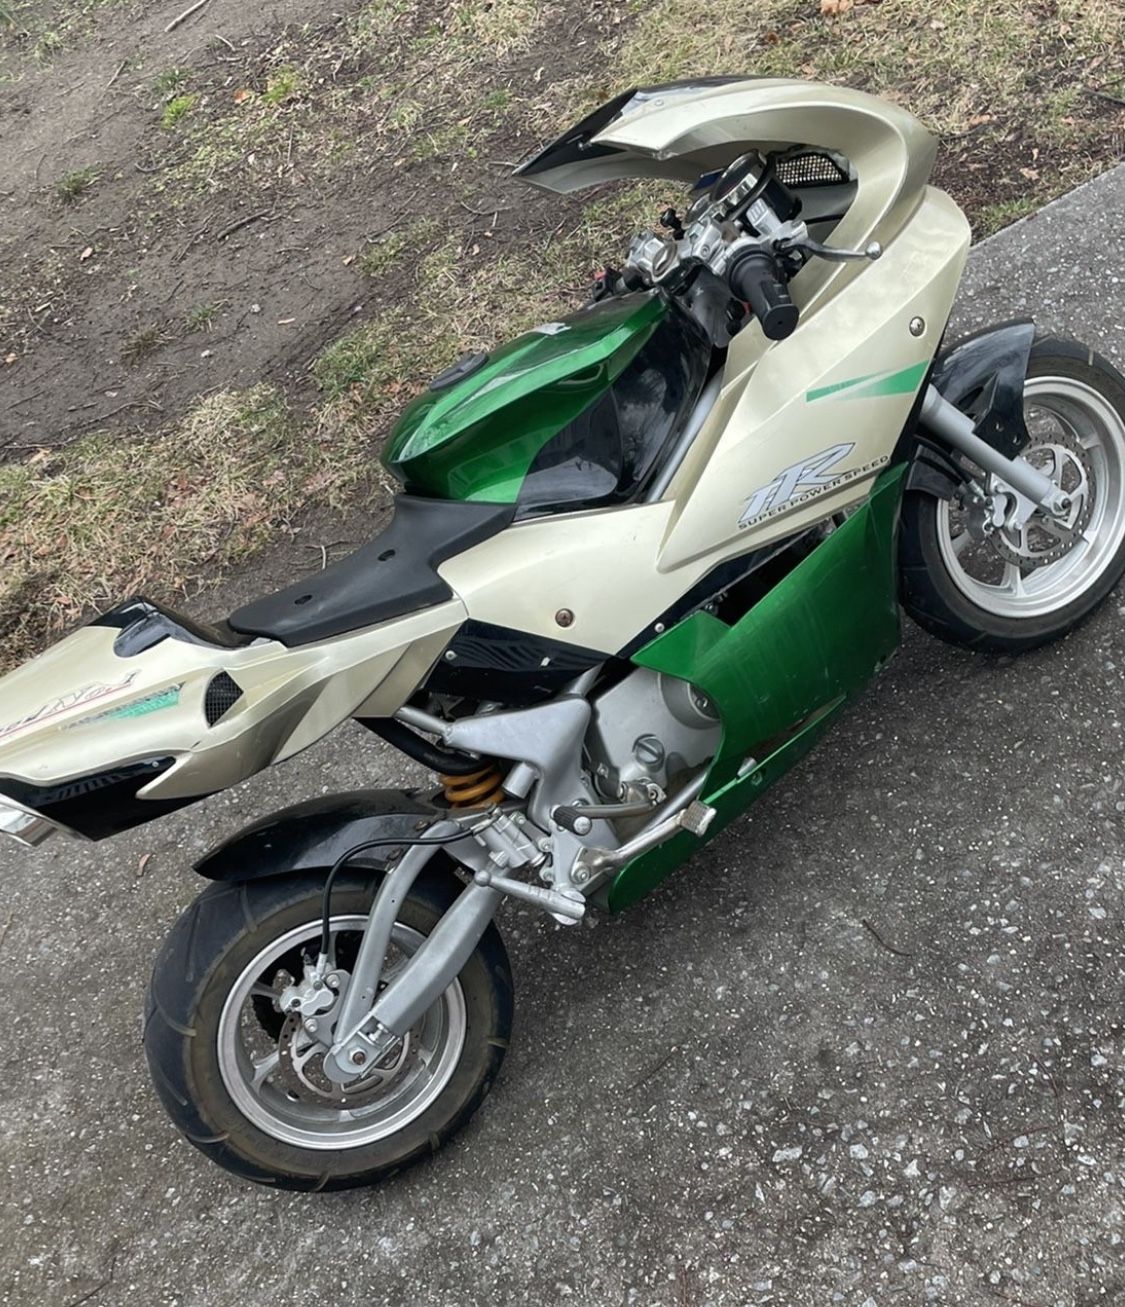 X 15 Super pocket Bike Looking To Trade For Kx 65